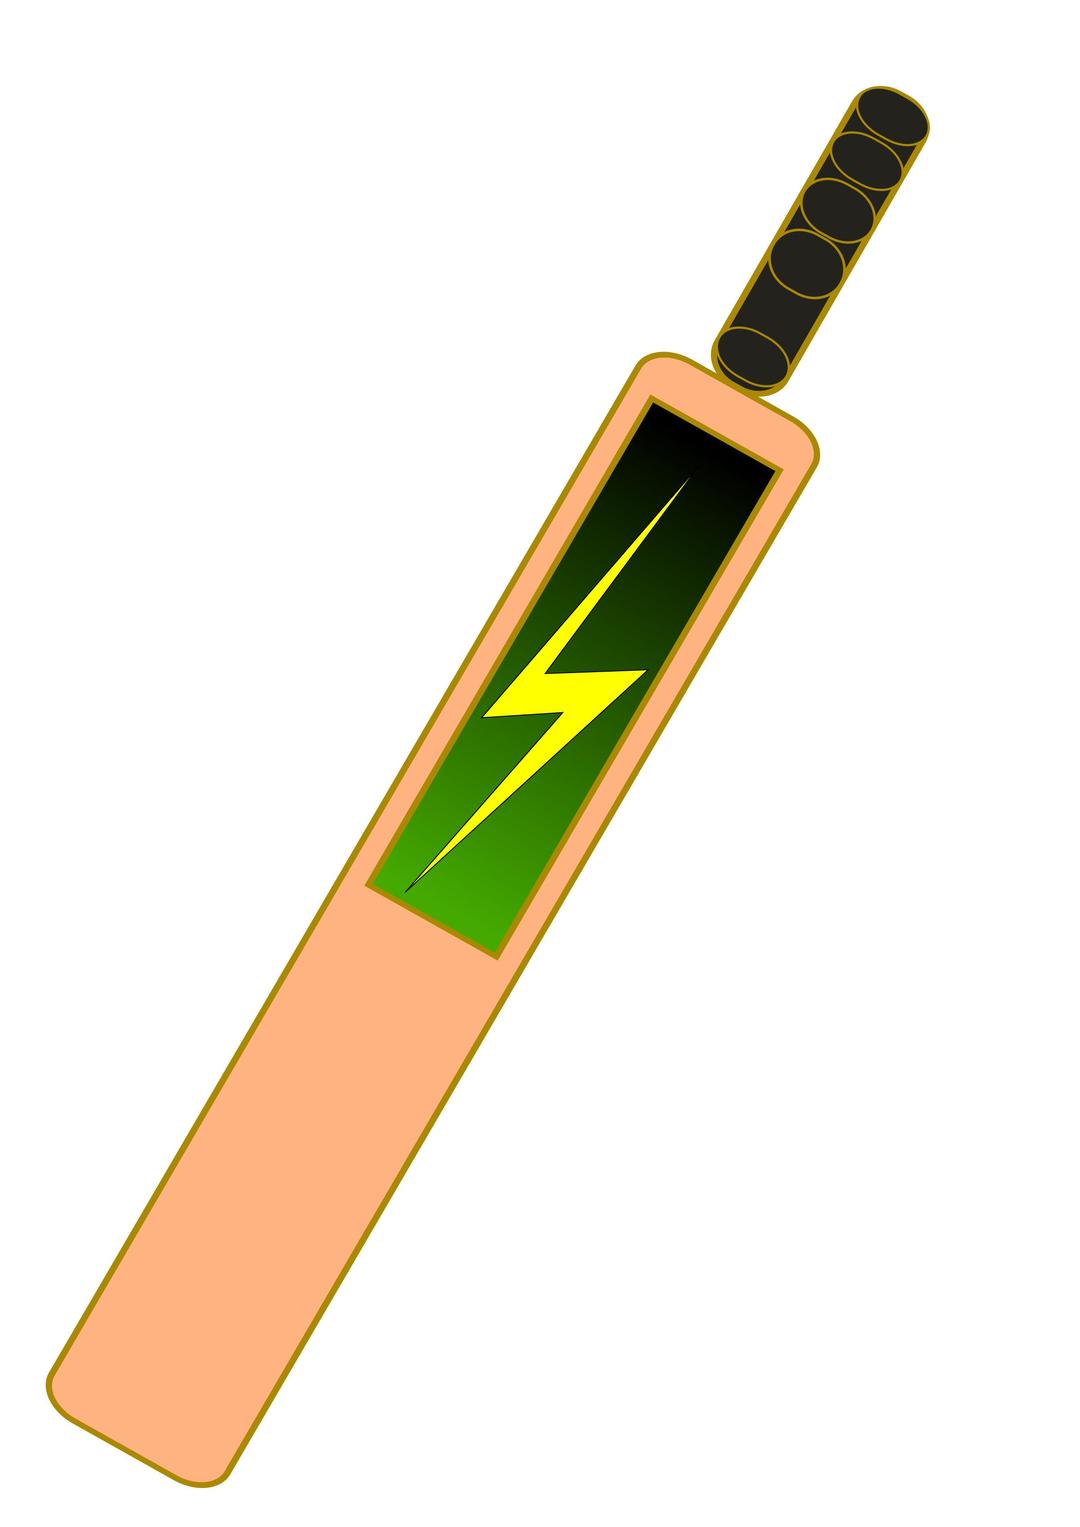 Cricketer's Power! png transparent